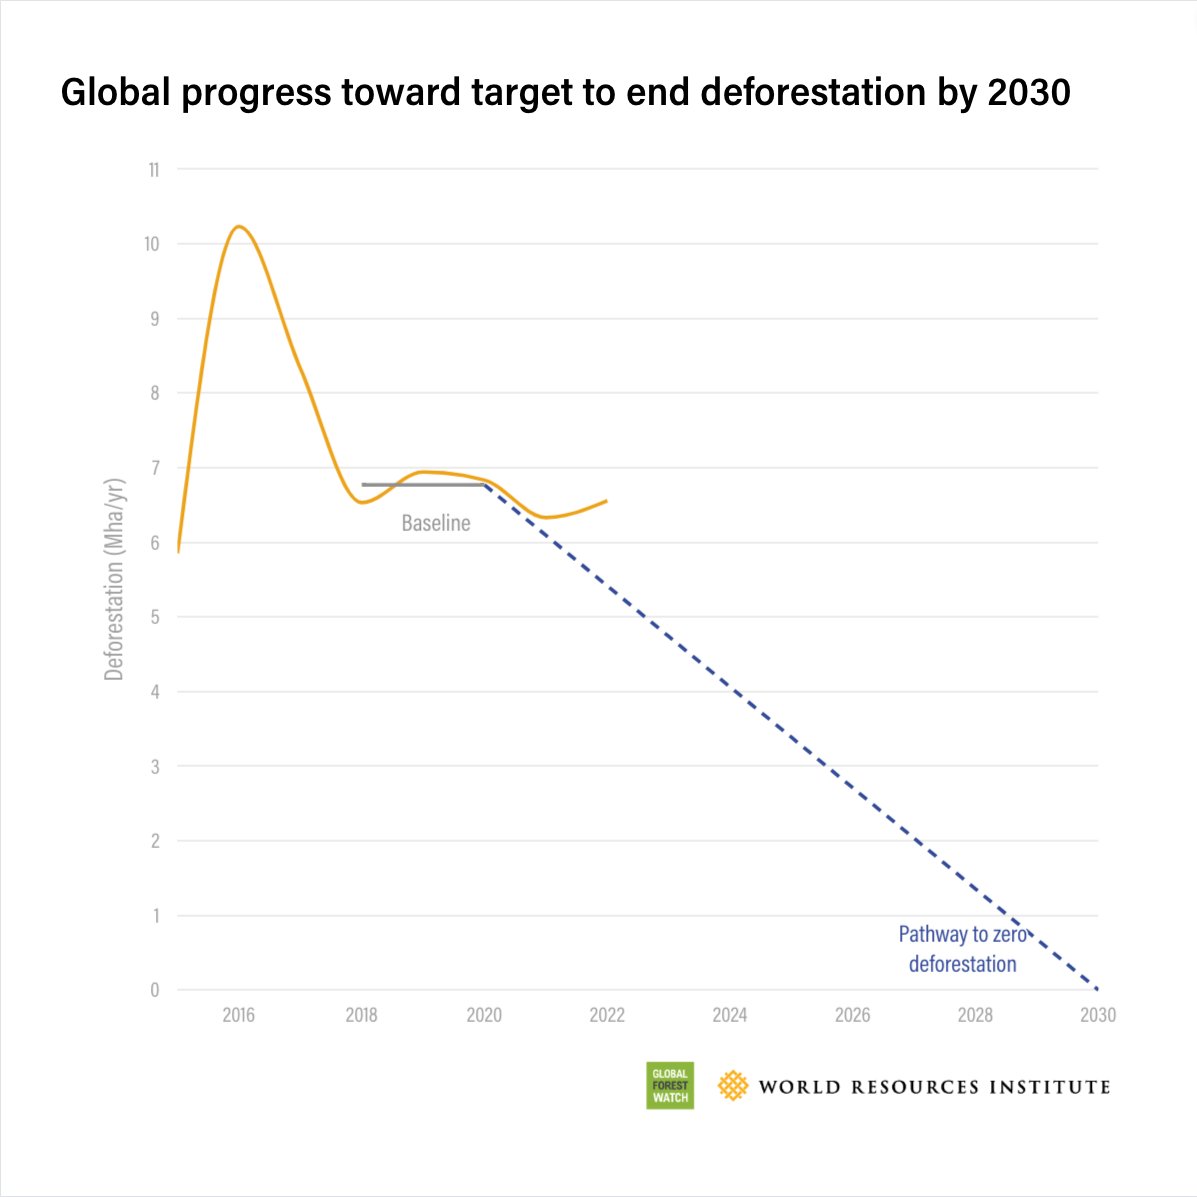 New data reveals countries are far off track from meeting major #deforestation commitments. But it’s still not too late to change course!

More on the #GlobalForestReview Targets Tracker: gfw.global/3NtOVWS